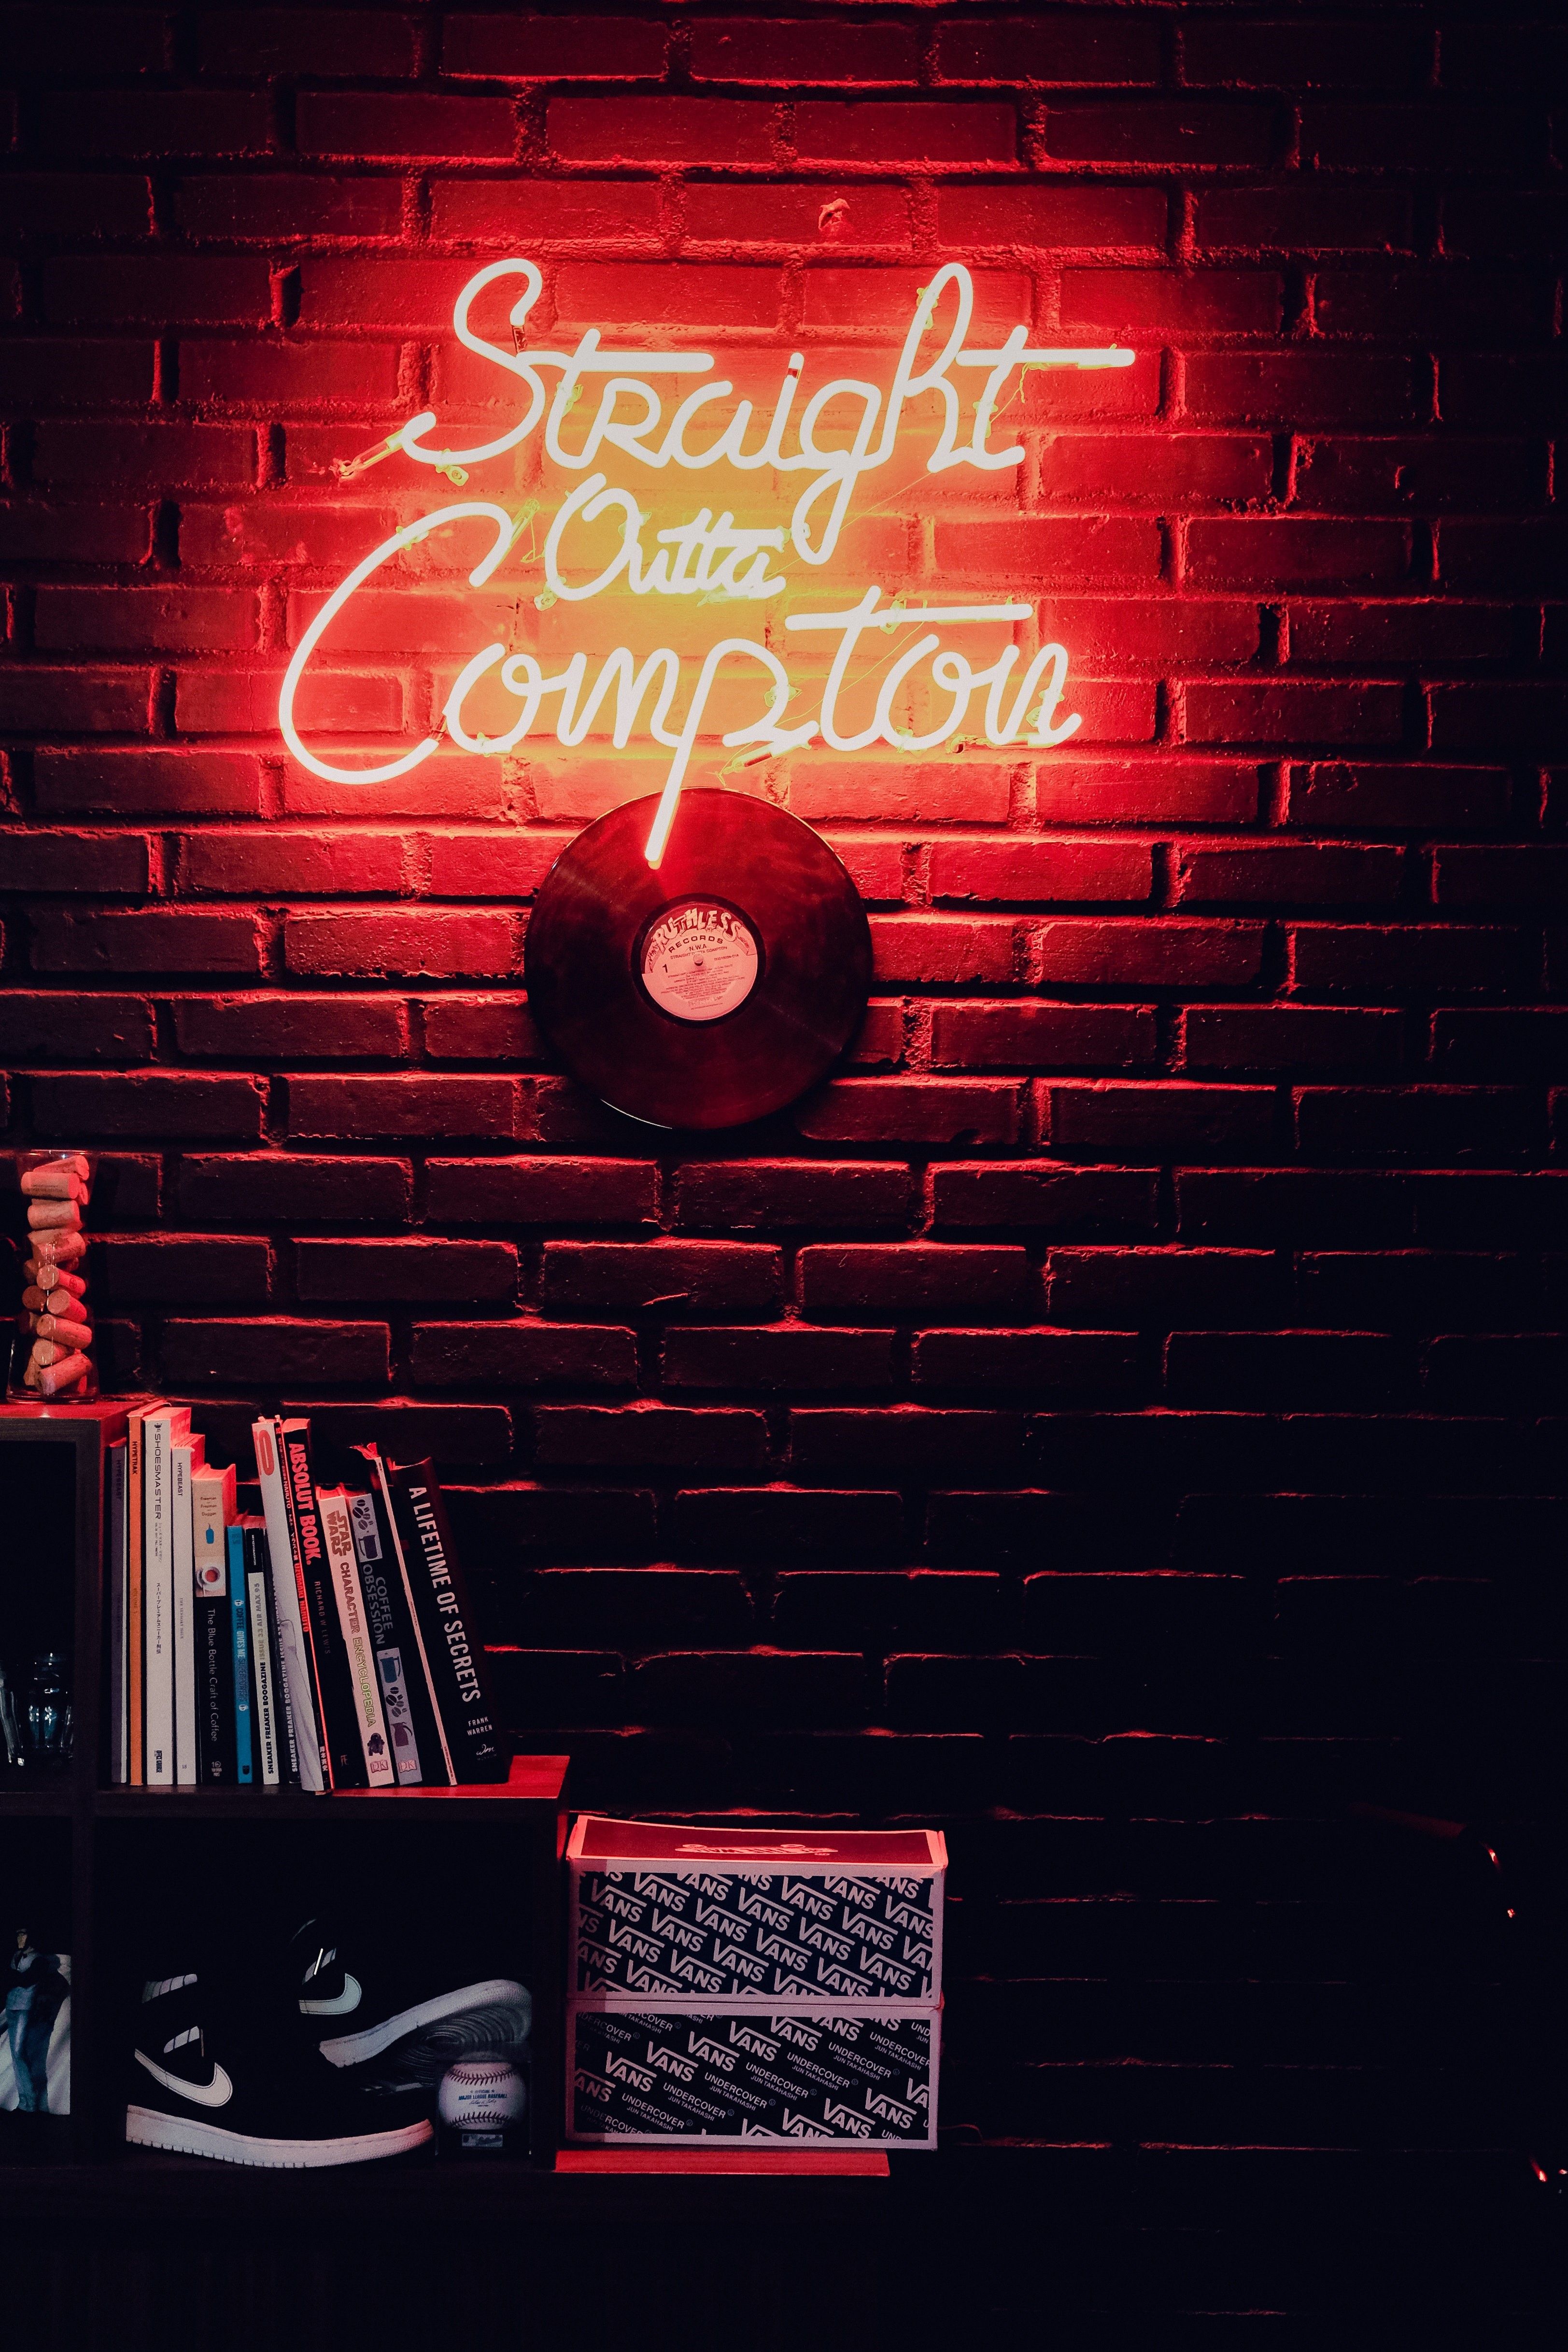 A neon sign that says strength over competition - Light red